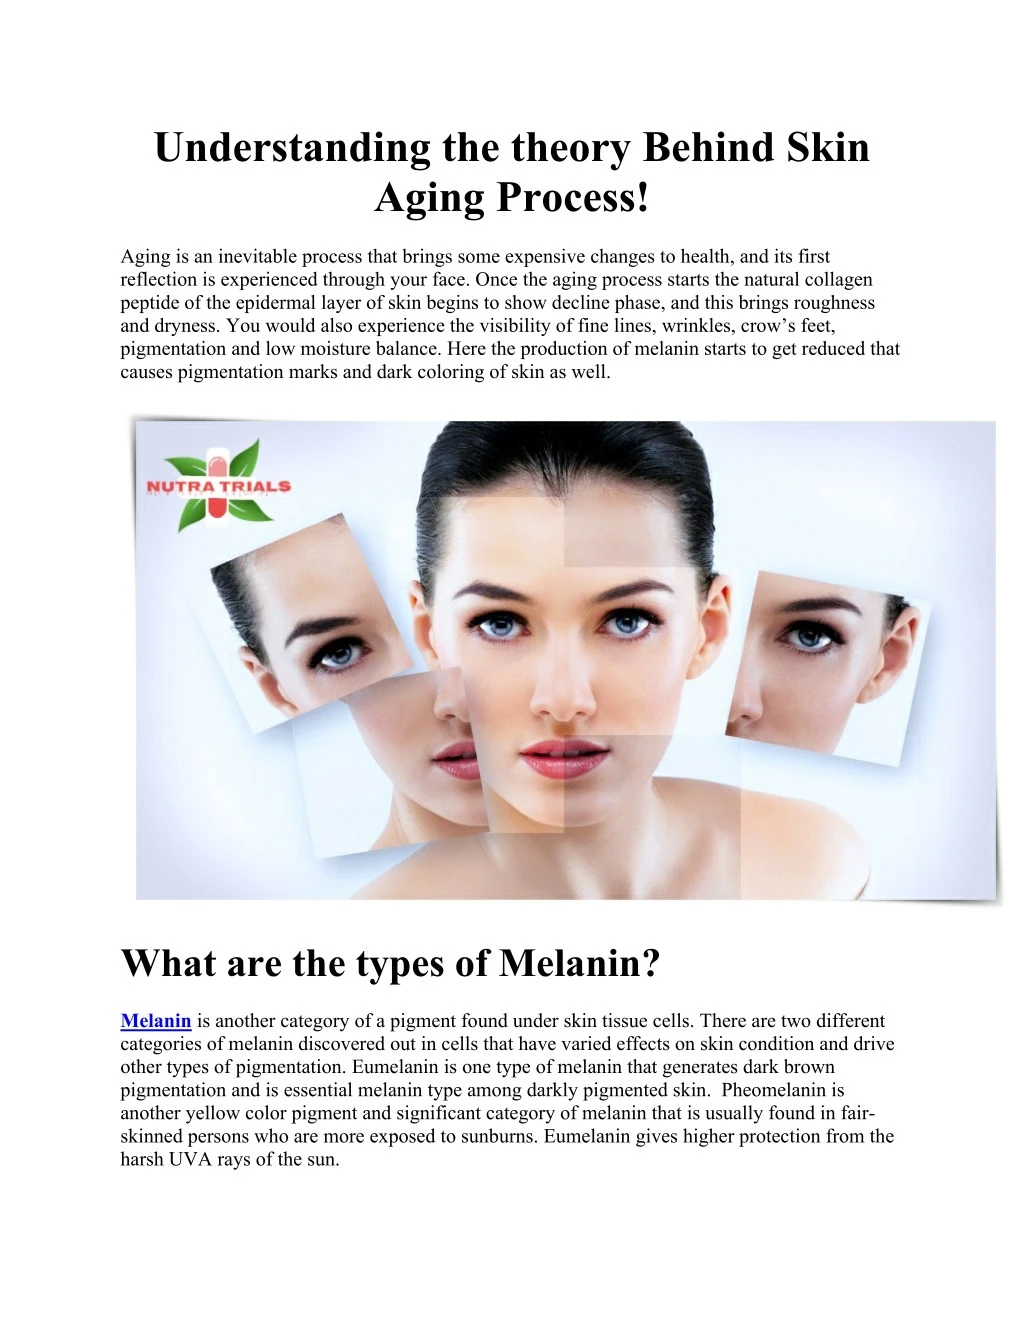 understanding the theory behind skin aging process